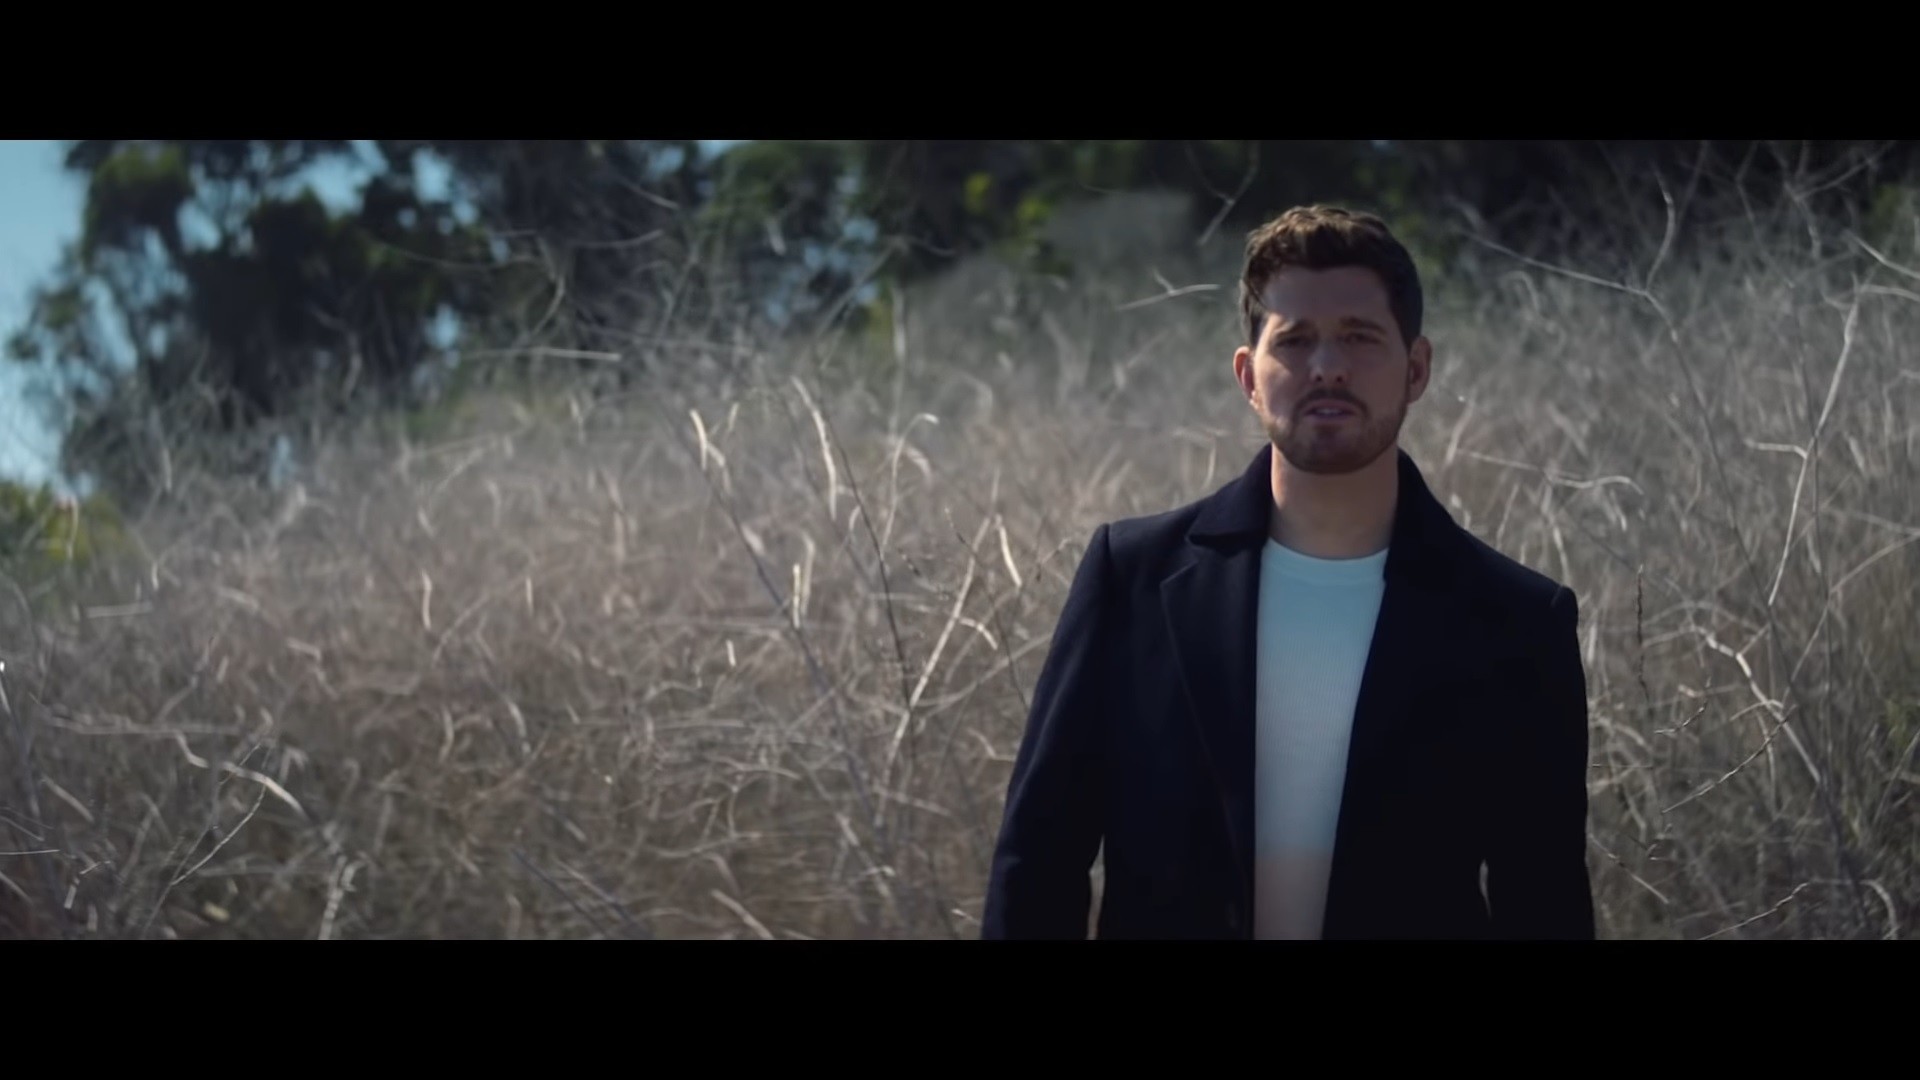 Michael Bublé - Love You Anymore